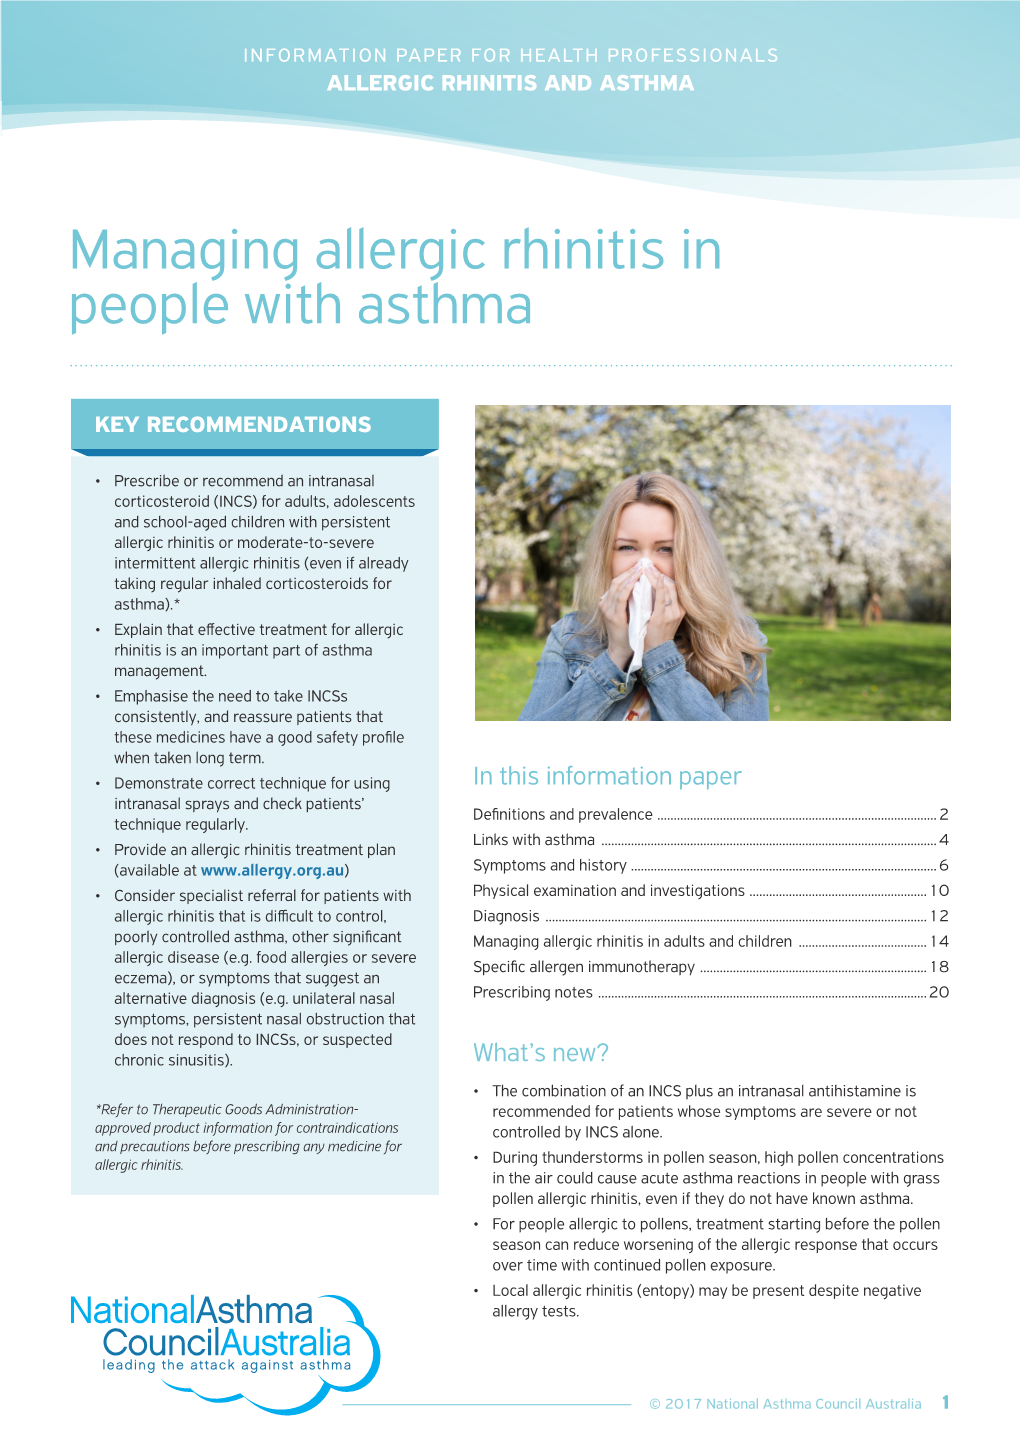 Managing Allergic Rhinitis in People with Asthma